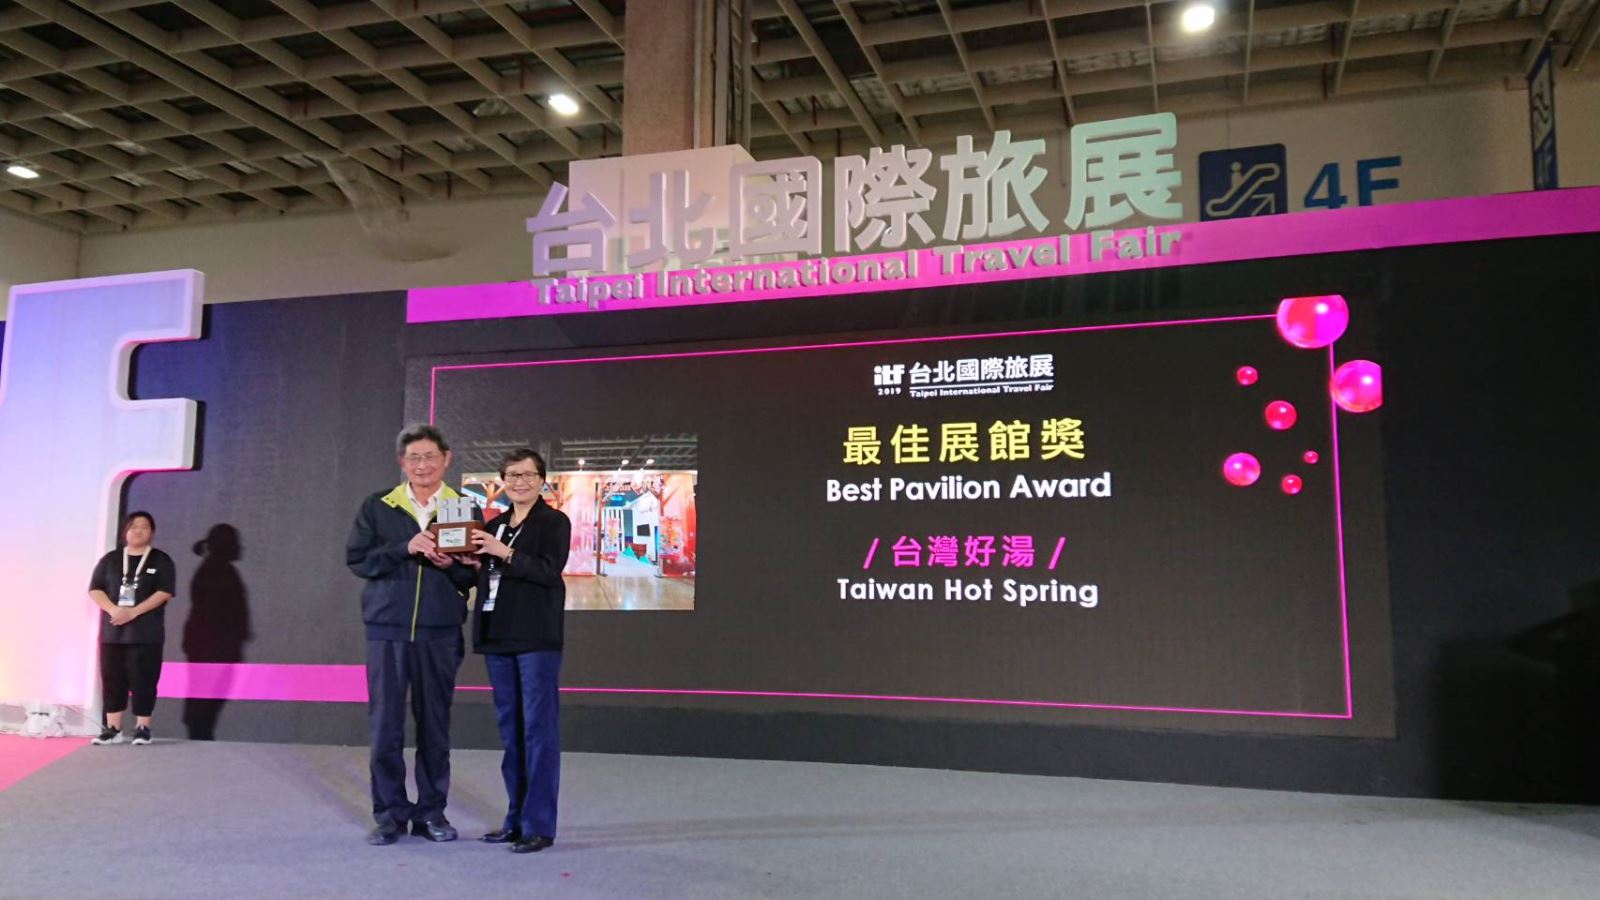 “Taiwan Hot Springs” received Best Exhibition Hall Award at the 2019 Taipei International Travel Fair 